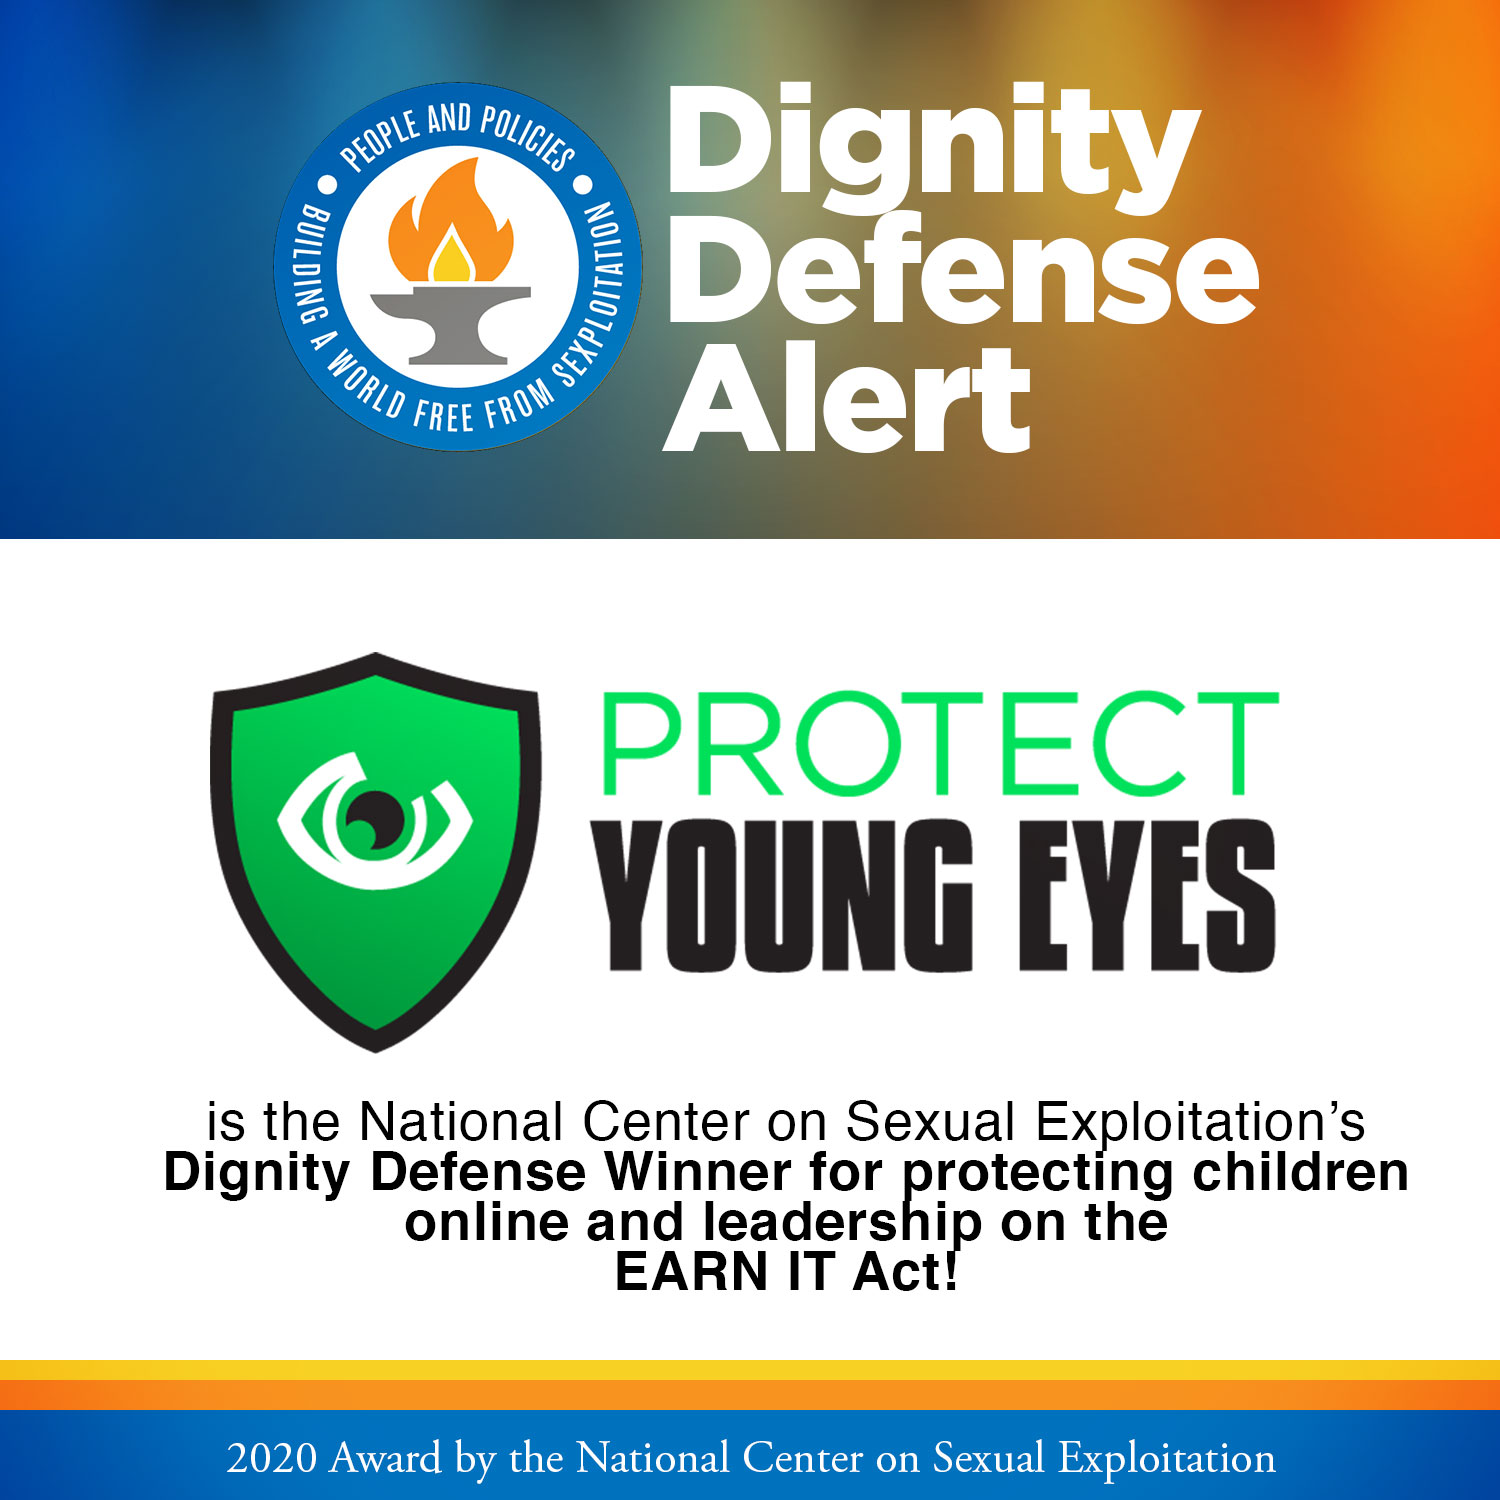 Dignity Defense Alert_August 2020_Protect Young Eyes_Social Media Shareable